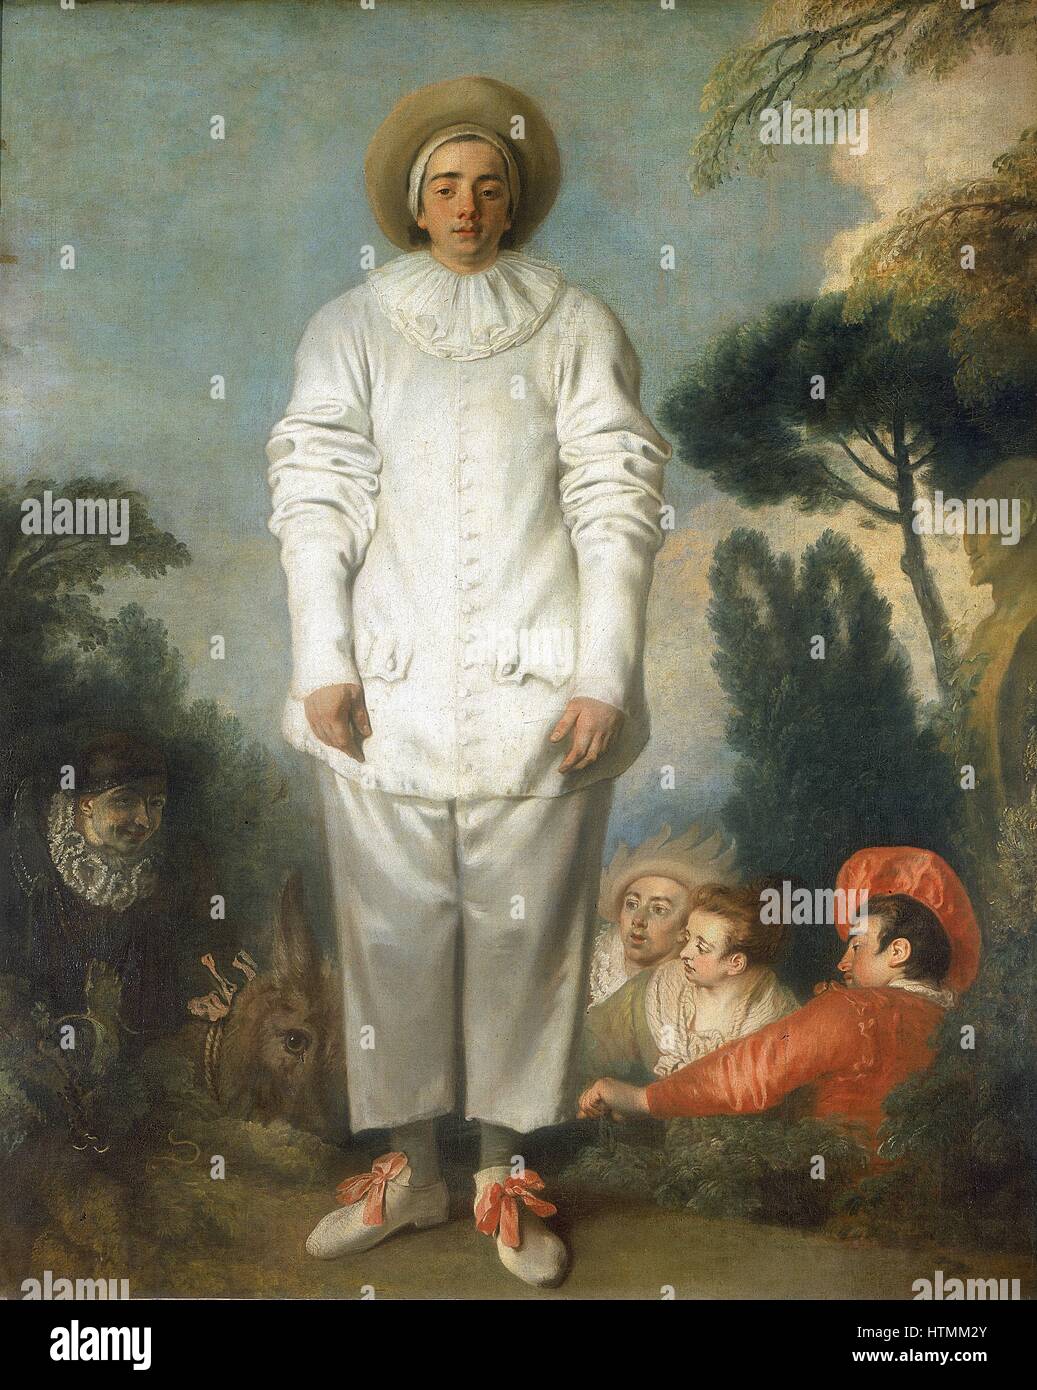 Gilles as Pierrot' by Jean-Antoine WATTEAU (1684-1721) French artist. Oil on canvas. Louvre, Paris. Pierrot (Pedrolino in original Italian commedia dell'arte), naïve, unsuccessful lover, played in baggy white satin suit and whitened, unmasked face. Othe Stock Photo